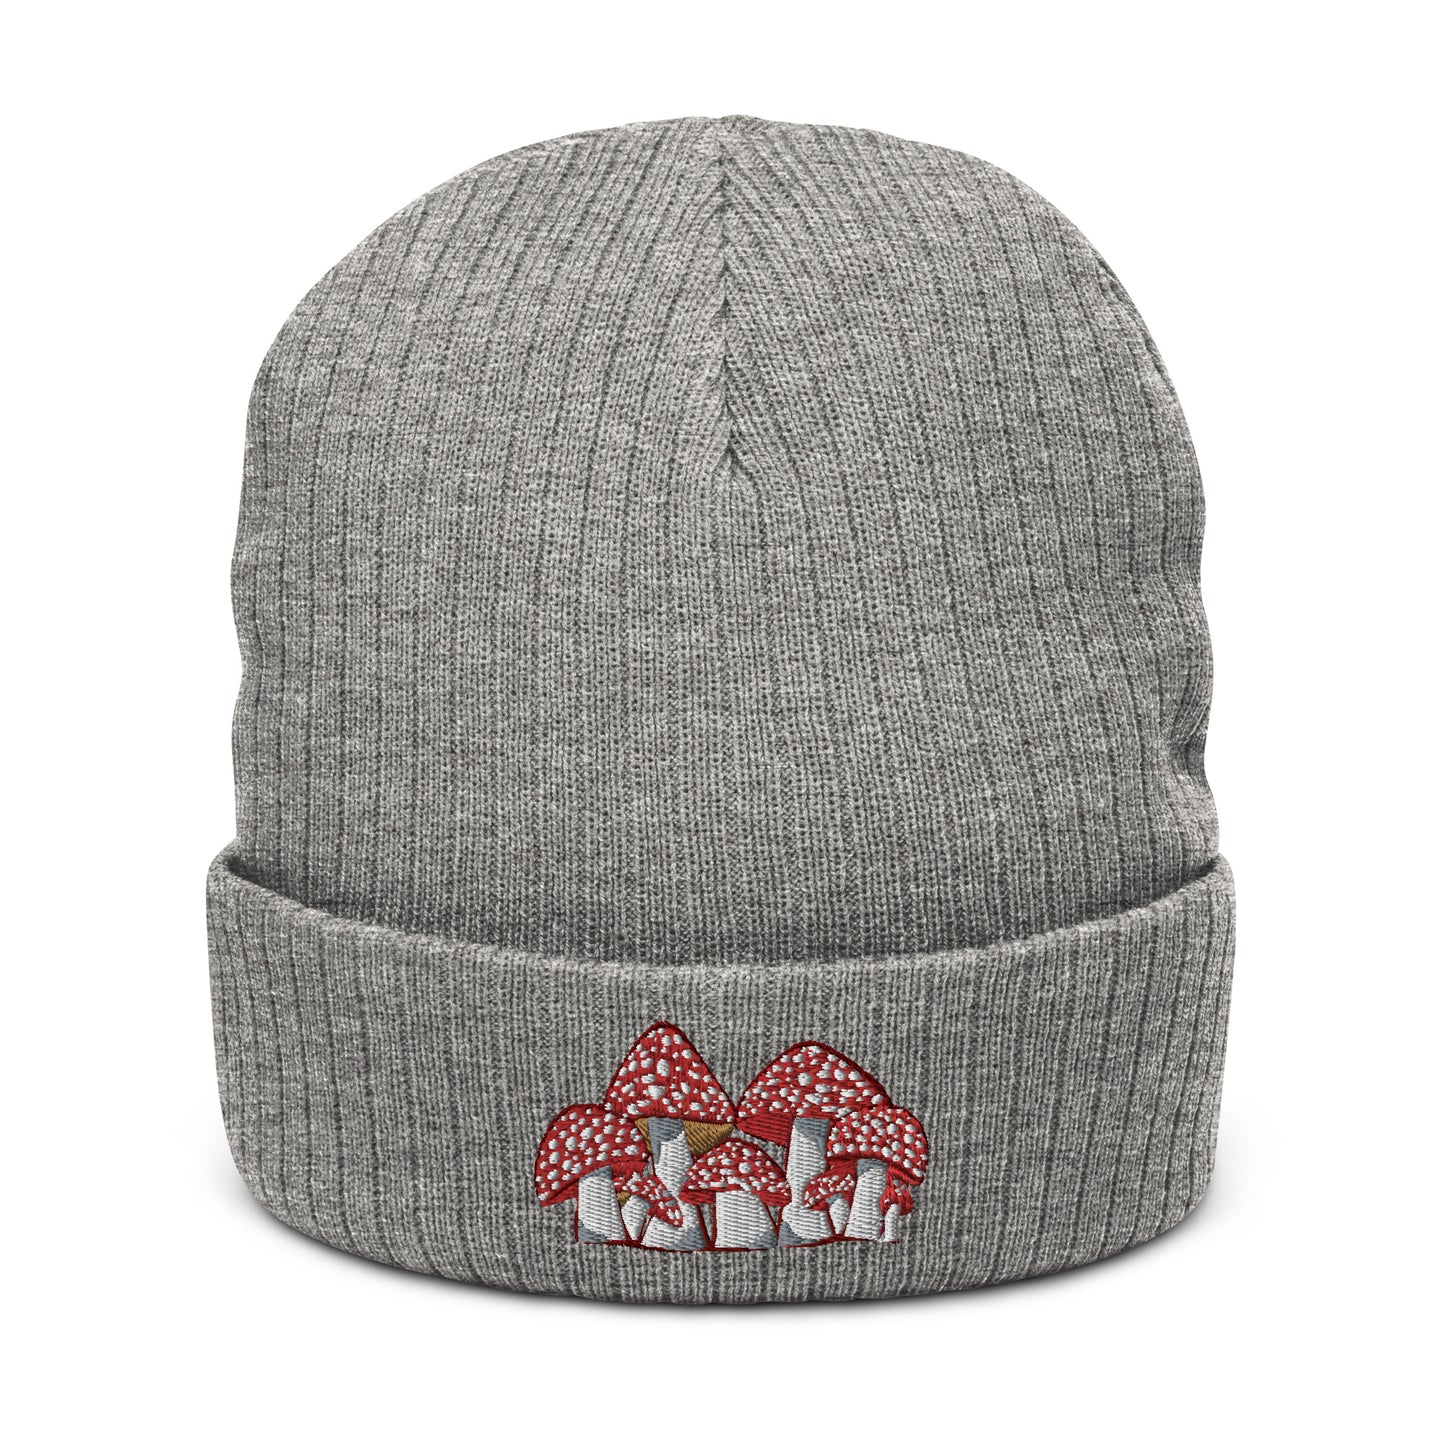 A grey ribbed knit beanie has an embroidery of Fly Agaric mushrooms on the front.